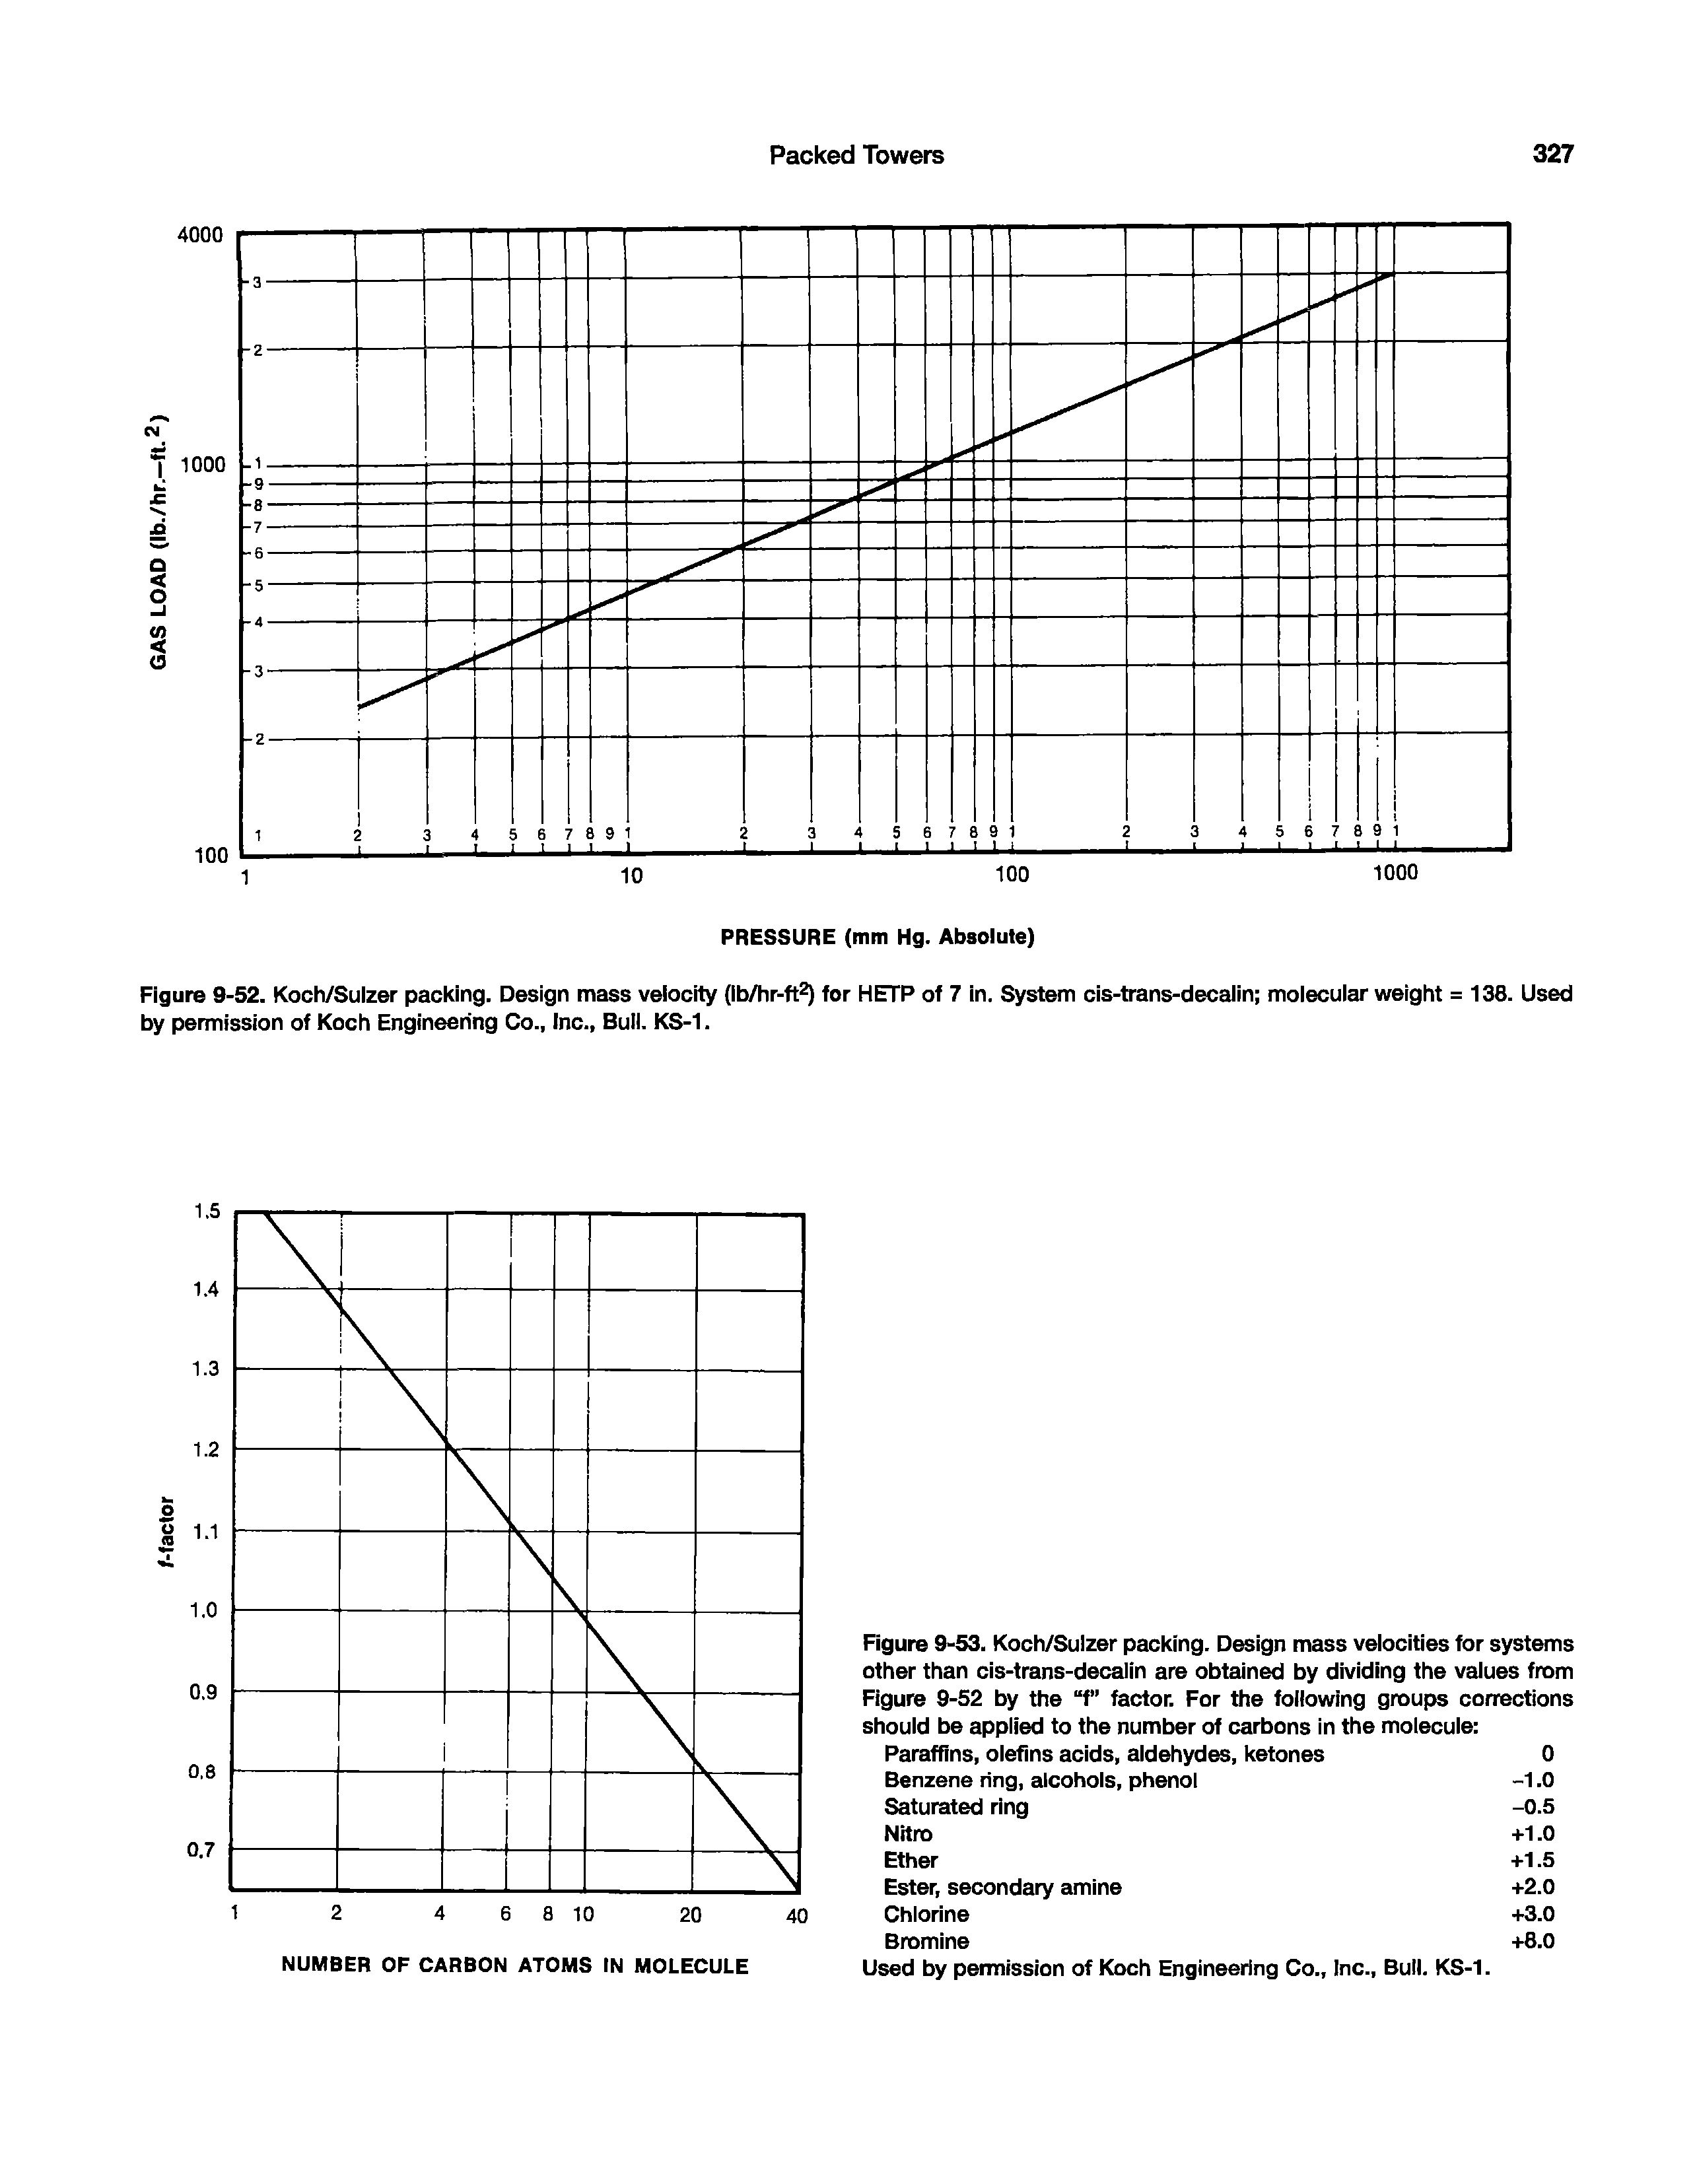 Figure 9-52. Koch/Sulzer packing. Design mass velocity (ib/hr-ft ) for HETP of 7 in. System cis-trans-decaiin moiecuiar weight = 138. Used by permission of Koch Engineering Co., Inc., Bull. KS-1.